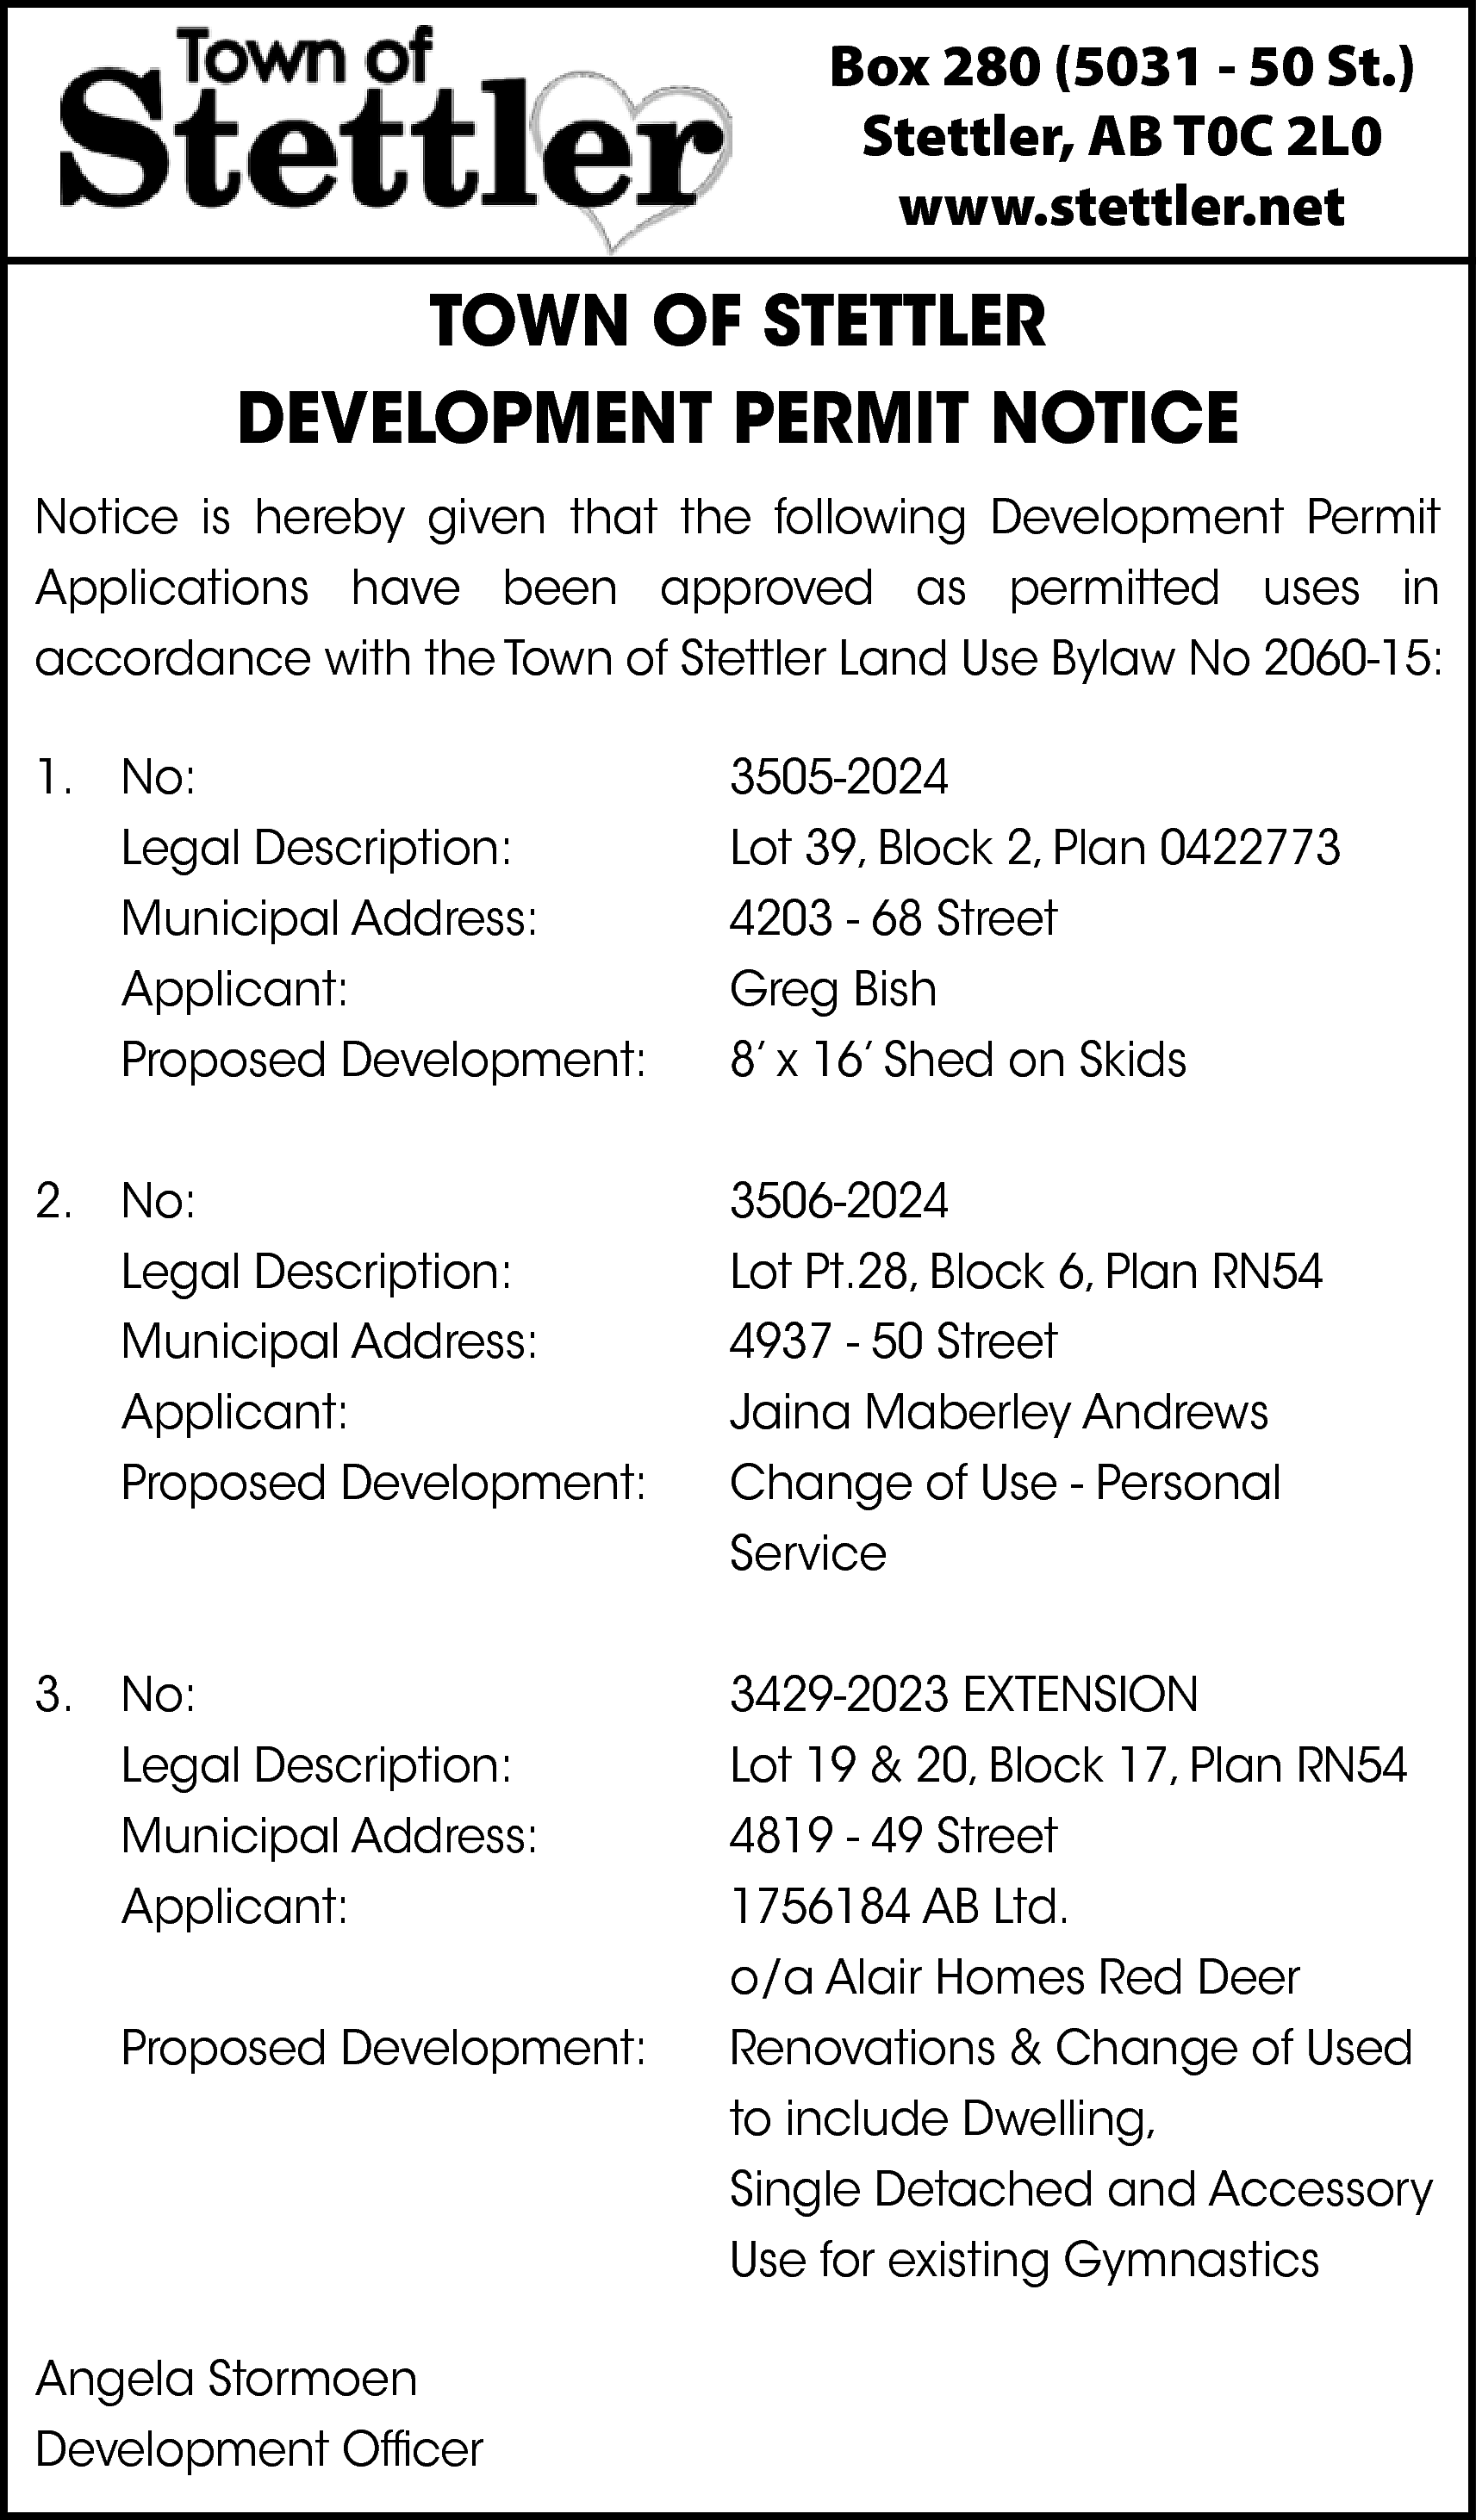 Box 280 (5031 - 50  Box 280 (5031 - 50 St.)  Stettler, AB T0C 2L0  www.stettler.net    TOWN OF STETTLER  DEVELOPMENT PERMIT NOTICE  Notice is hereby given that the following Development Permit  Applications have been approved as permitted uses in  accordance with the Town of Stettler Land Use Bylaw No 2060-15:  1. No:  Legal Description:  Municipal Address:  Applicant:  Proposed Development:    3505-2024  Lot 39, Block 2, Plan 0422773  4203 - 68 Street  Greg Bish  8’ x 16’ Shed on Skids    2. No:  Legal Description:  Municipal Address:  Applicant:  Proposed Development:    3506-2024  Lot Pt.28, Block 6, Plan RN54  4937 - 50 Street  Jaina Maberley Andrews  Change of Use - Personal  Service    3. No:  Legal Description:  Municipal Address:  Applicant:    3429-2023 EXTENSION  Lot 19 & 20, Block 17, Plan RN54  4819 - 49 Street  1756184 AB Ltd.  o/a Alair Homes Red Deer  Renovations & Change of Used  to include Dwelling,  Single Detached and Accessory  Use for existing Gymnastics    Proposed Development:    Angela Stormoen  Development Officer    